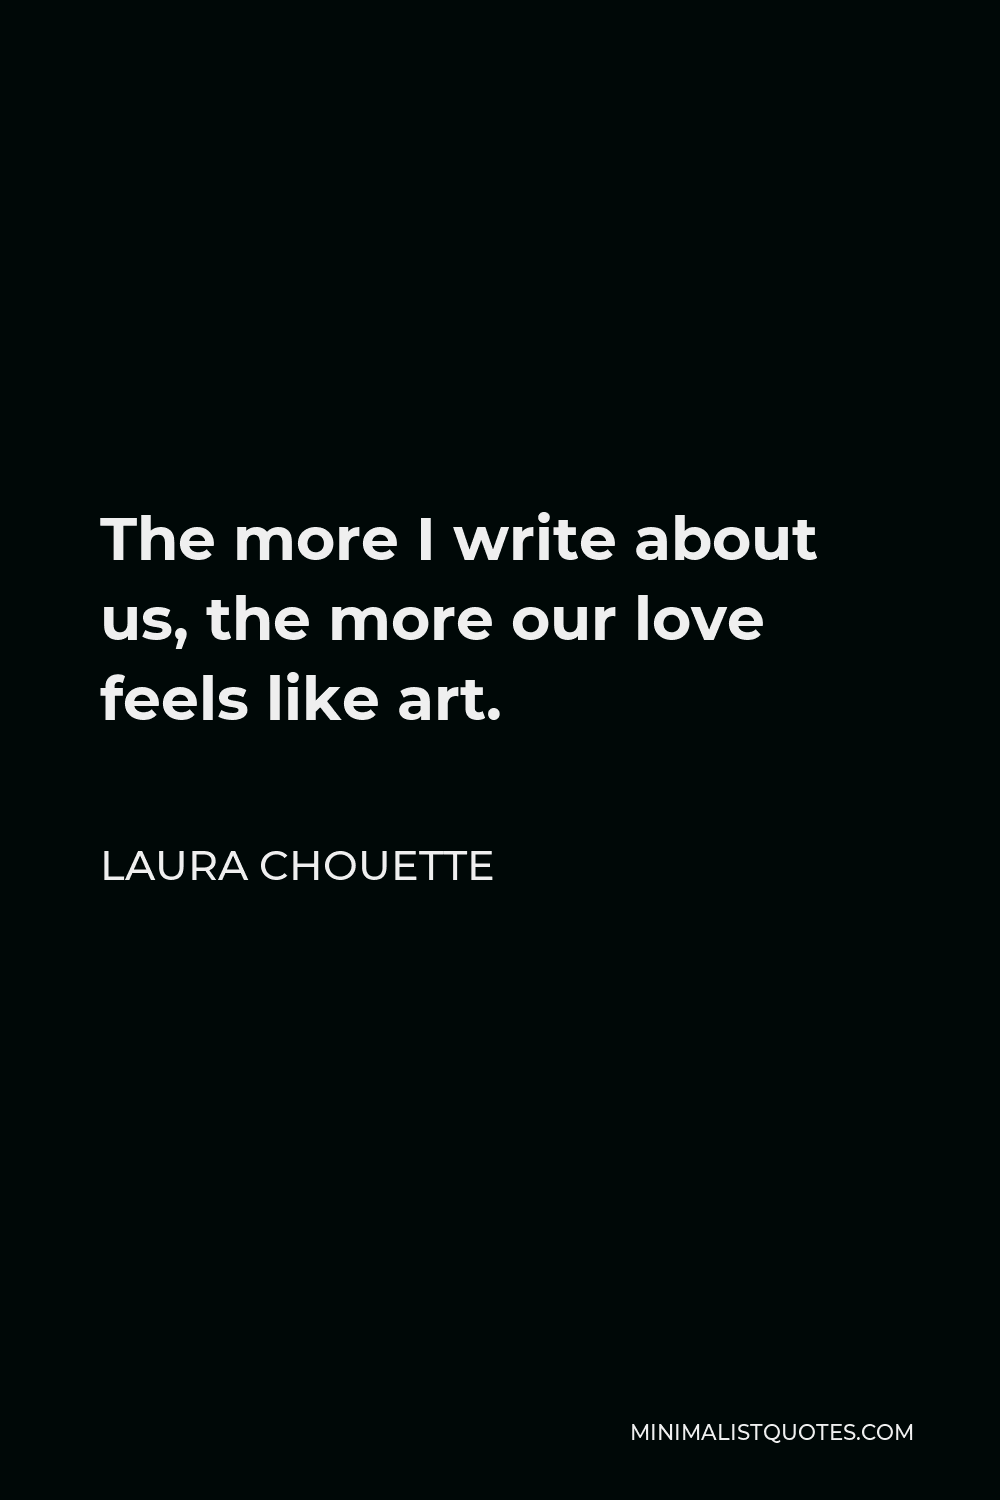 Laura Chouette Quote - The more I write about us, the more our love feels like art.